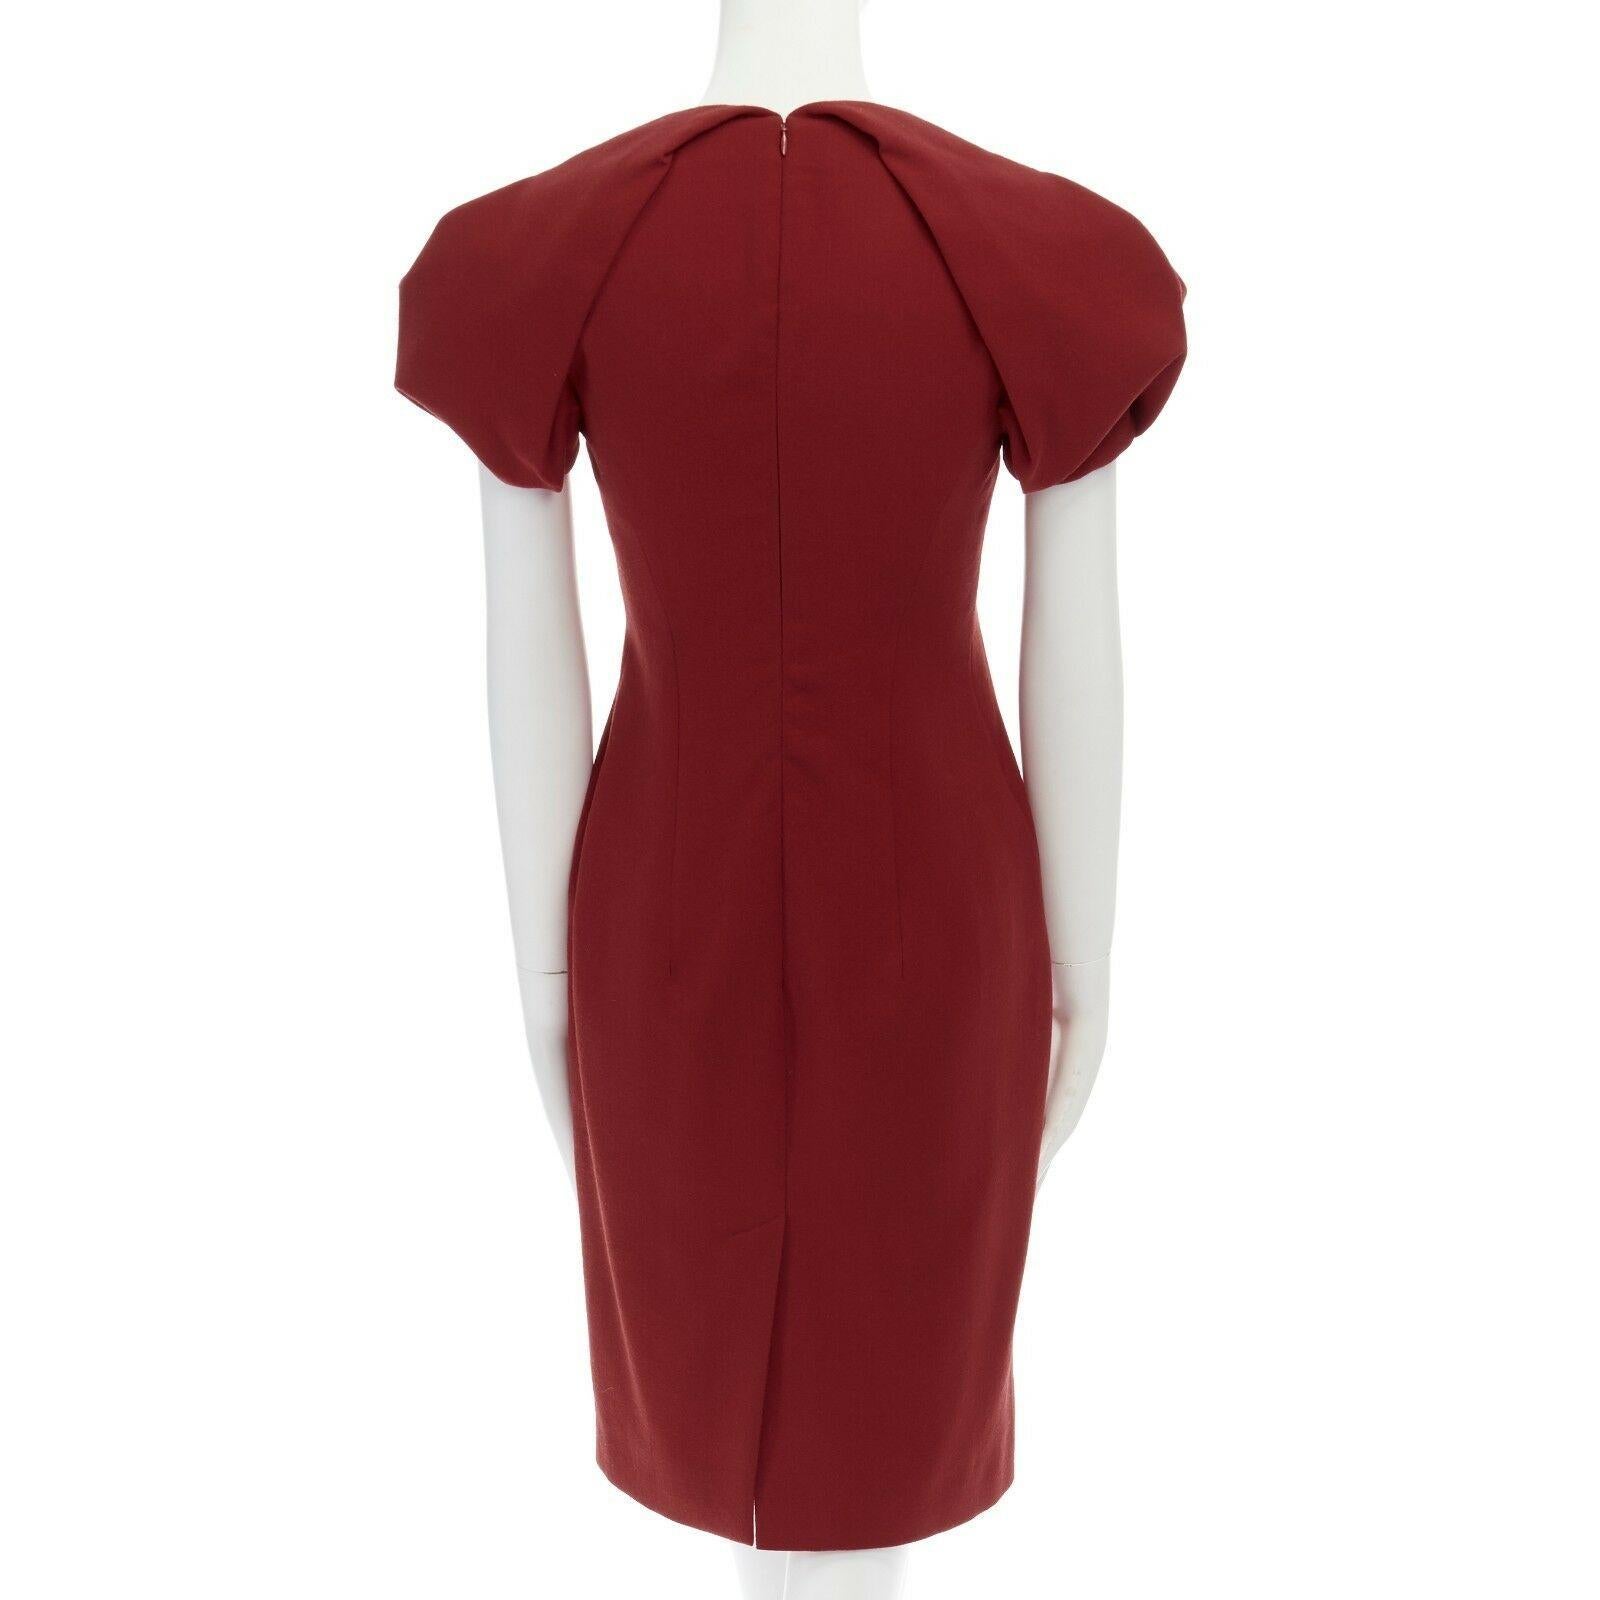 ALEXANDER MCQUEEN 100% wool crepe V-neck pleated sleeves cocktail dress IT38 XS
Designer: Alexander McQueen
Material: Wool
Color: red
Extra Details: 100% wool crepe. Red. V-neck. Pleated voluminous short sleeves. Tonal stitching. Fully lined in